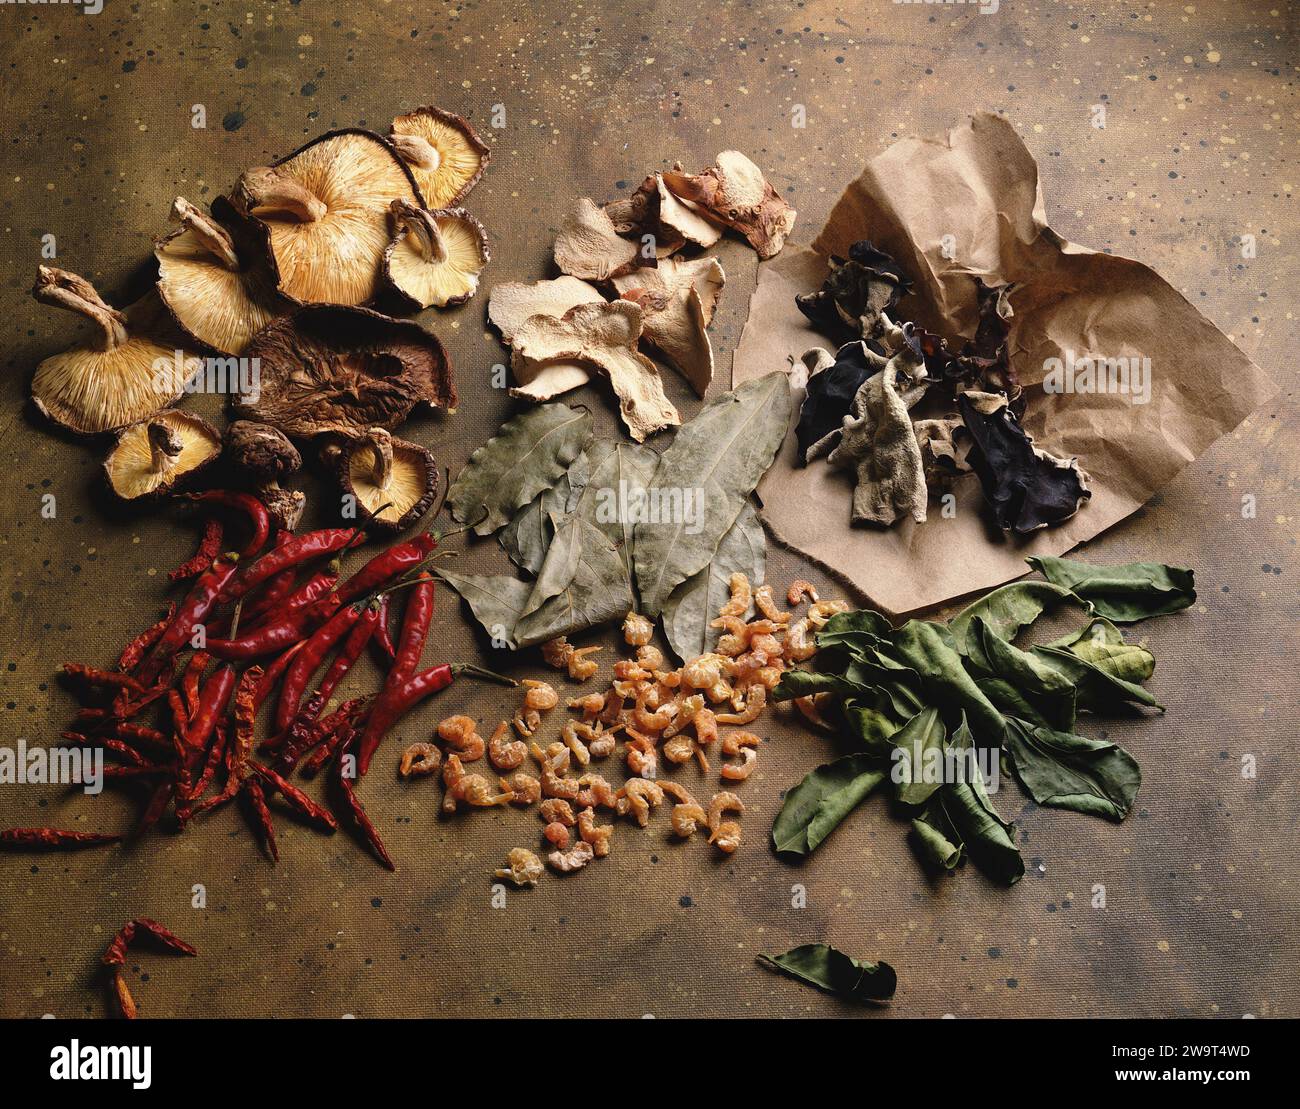 Dried Mushrooms, Chilis and Leaves on brown background Stock Photo